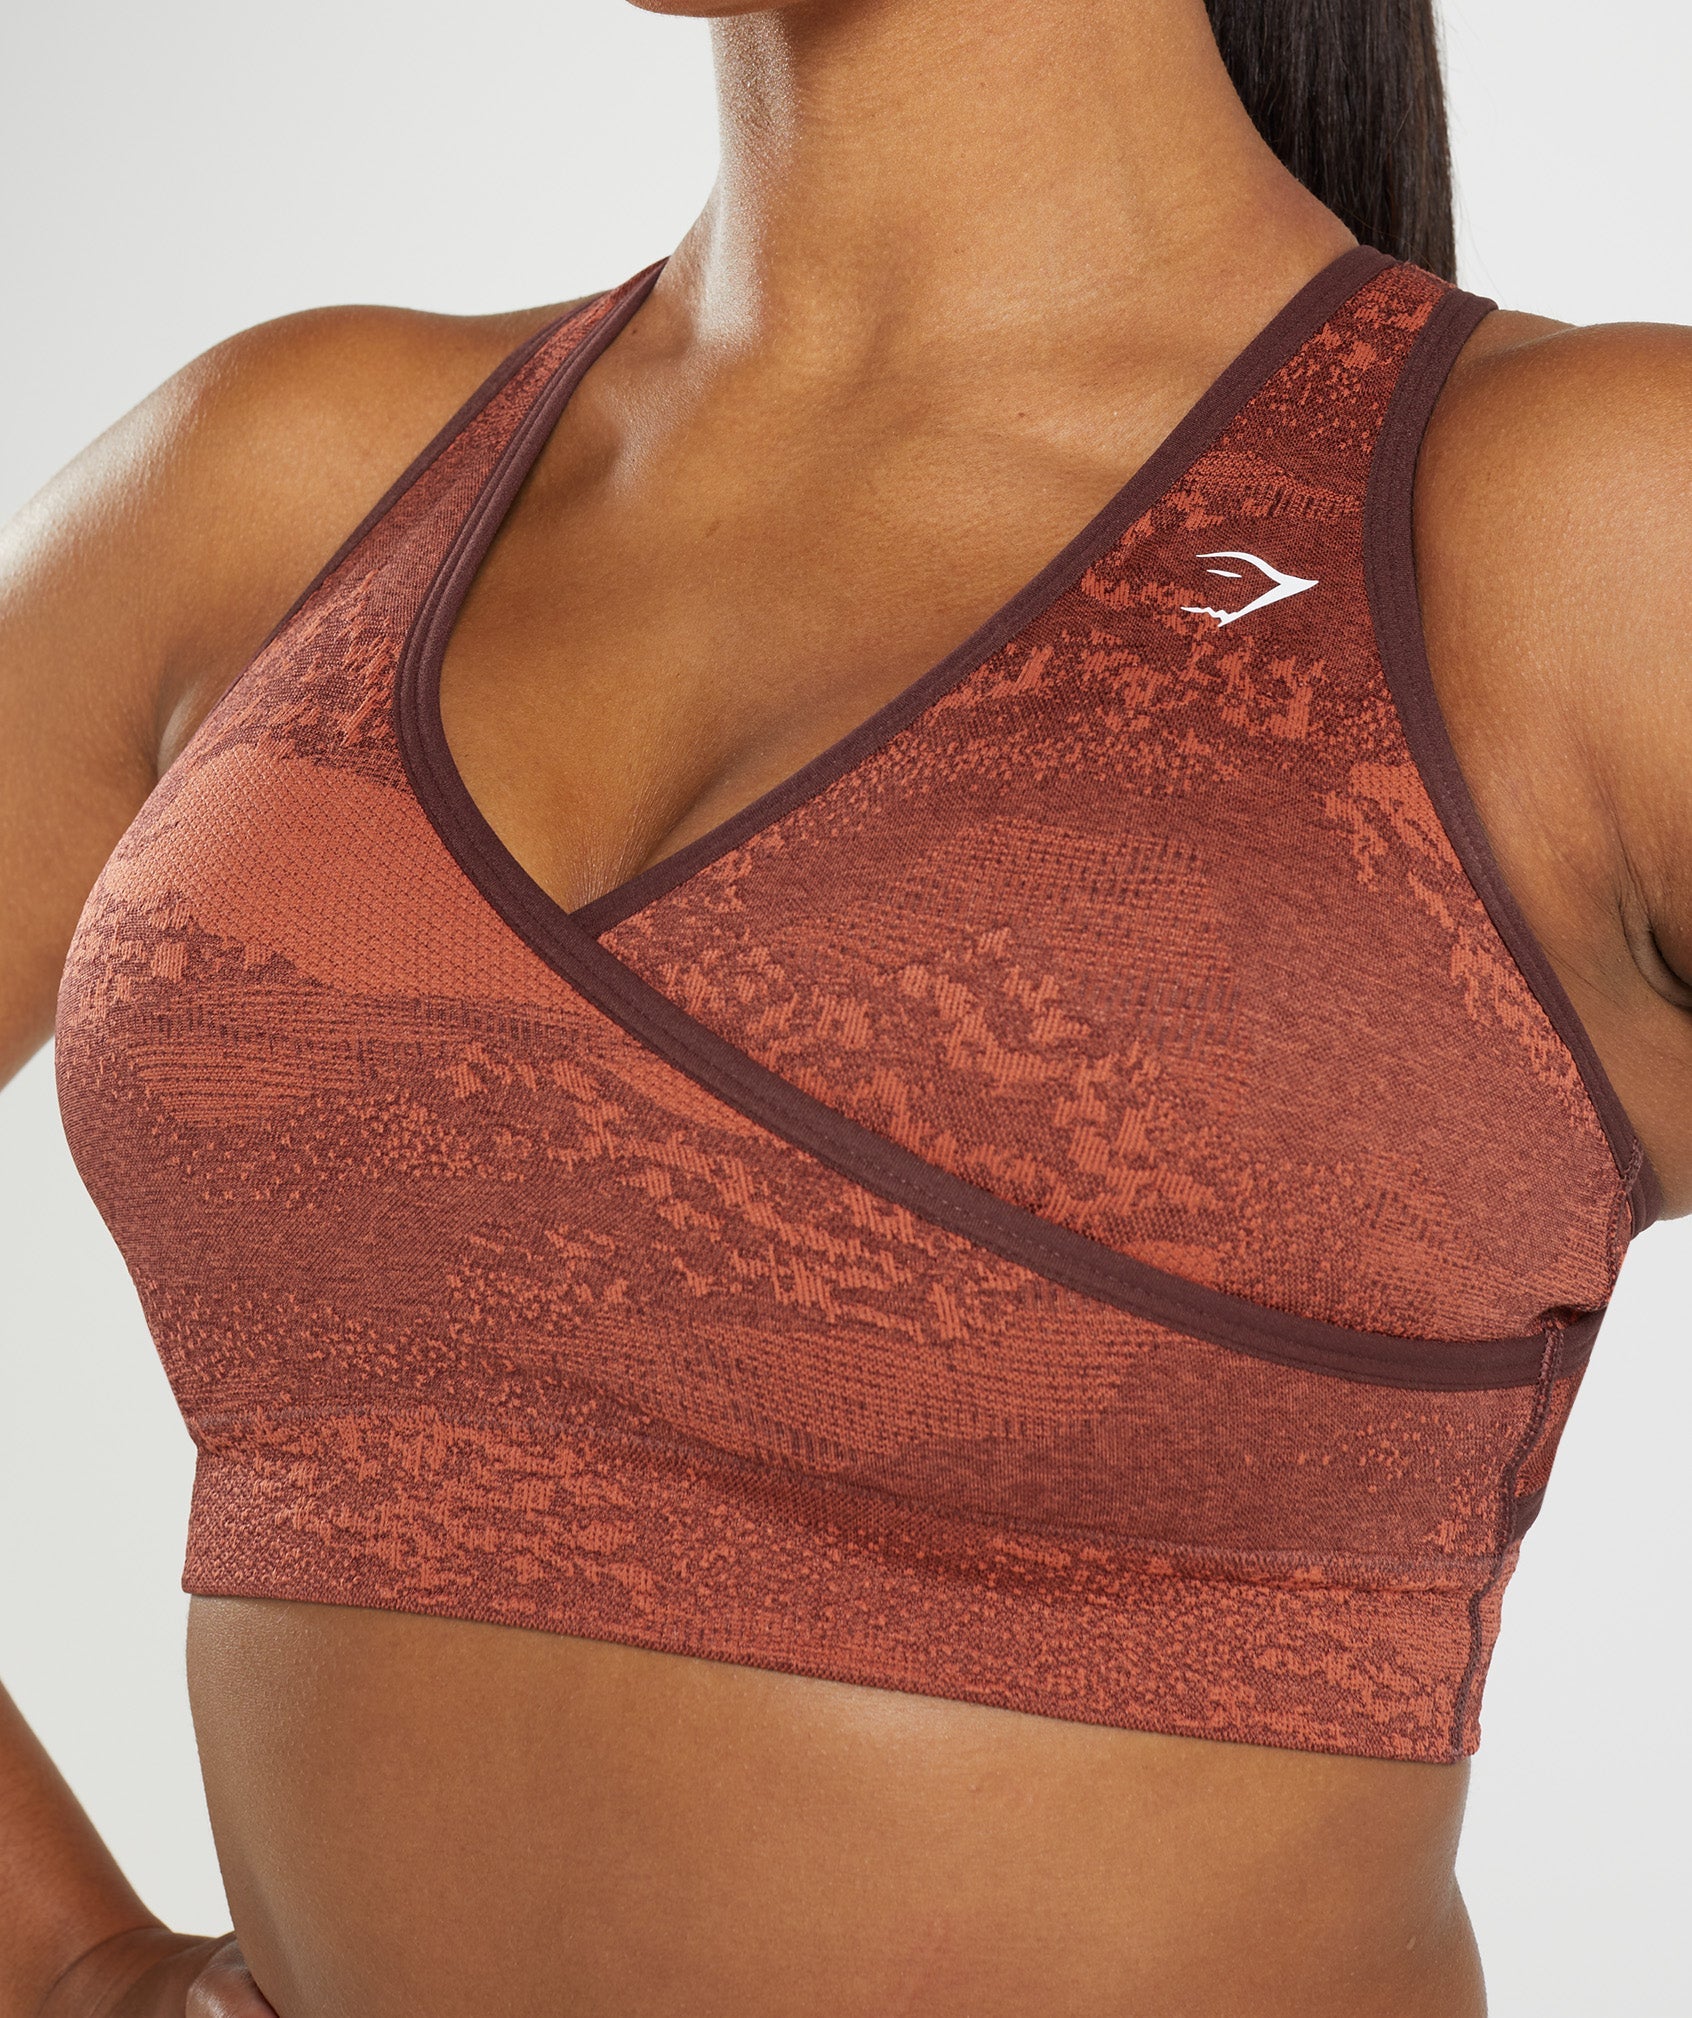 Adapt Camo Seamless Sports Bra in Storm Red/Cherry Brown - view 6